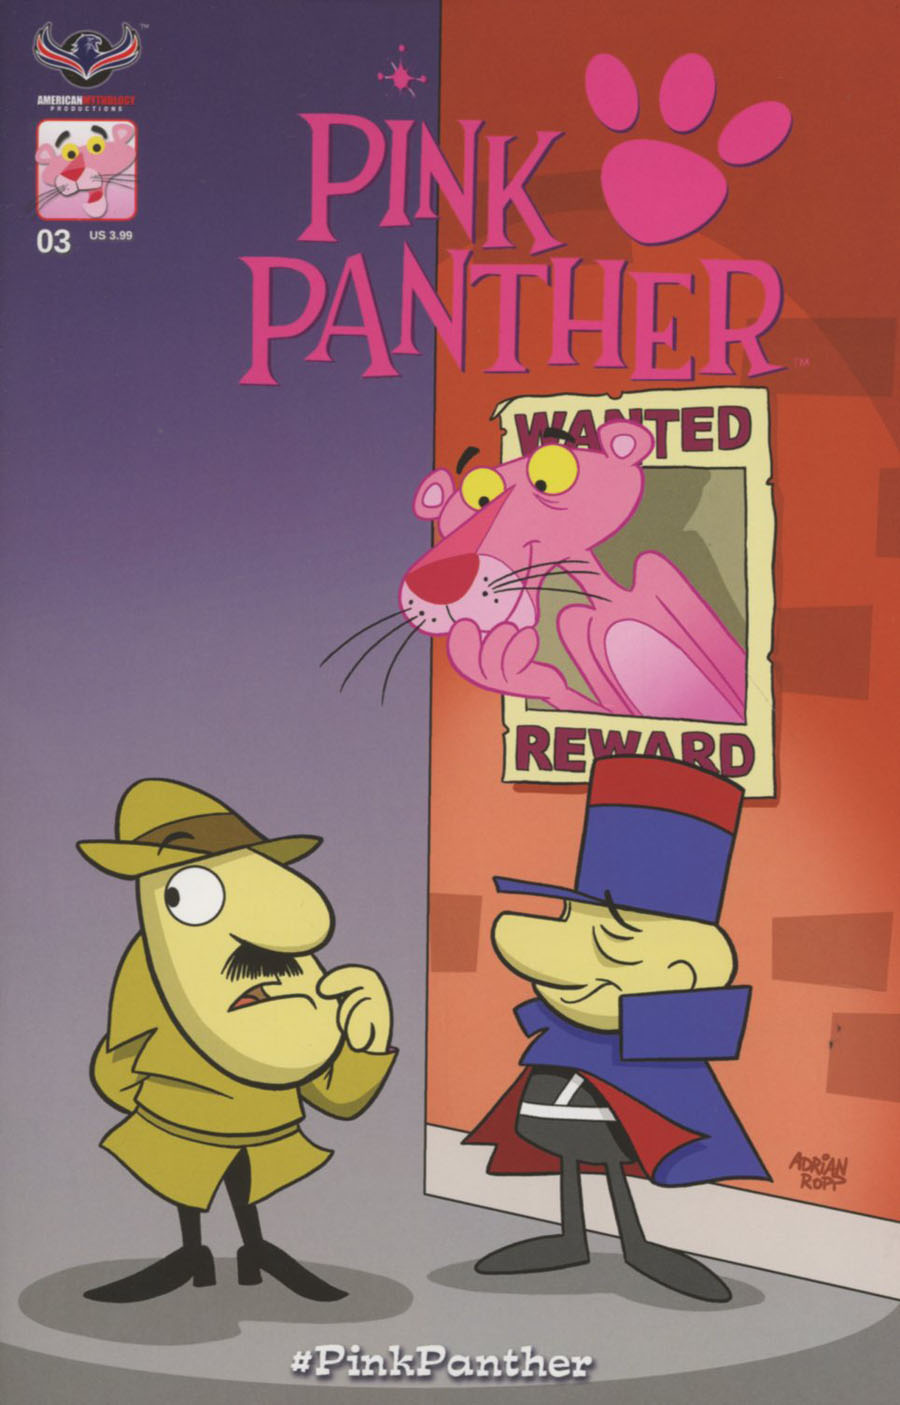 Pink Panther Vol 3 #3 Cover A Regular Adrian Ropp Cover